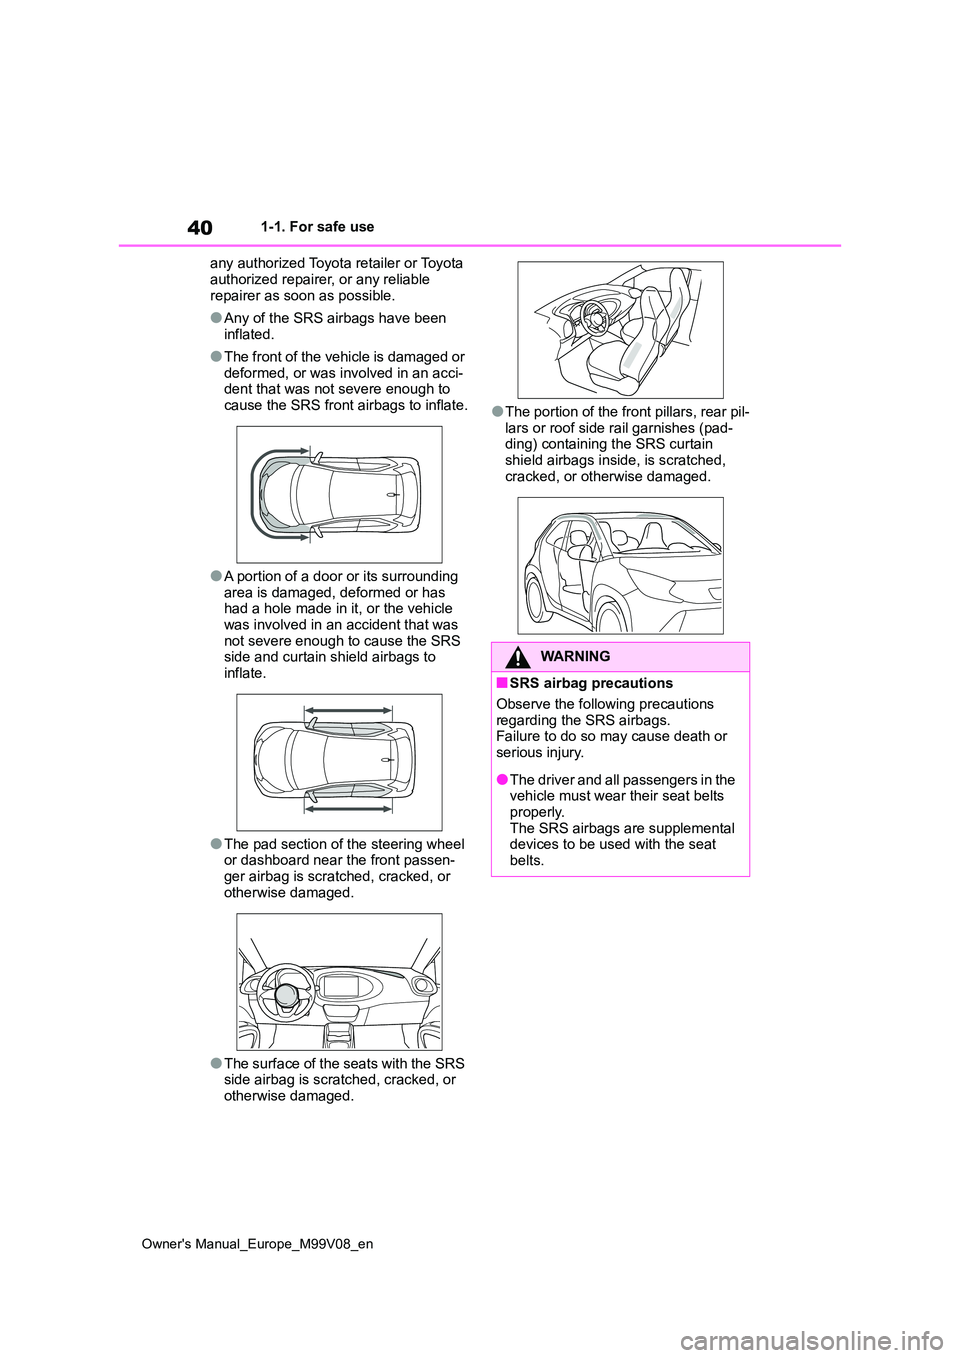 TOYOTA AYGO X 2022  Owners Manual (in English) 40
Owner's Manual_Europe_M99V08_en
1-1. For safe use 
any authorized Toyota retailer or Toyota  
authorized repairer, or any reliable  repairer as soon as possible.
●Any of the SRS airbags have 